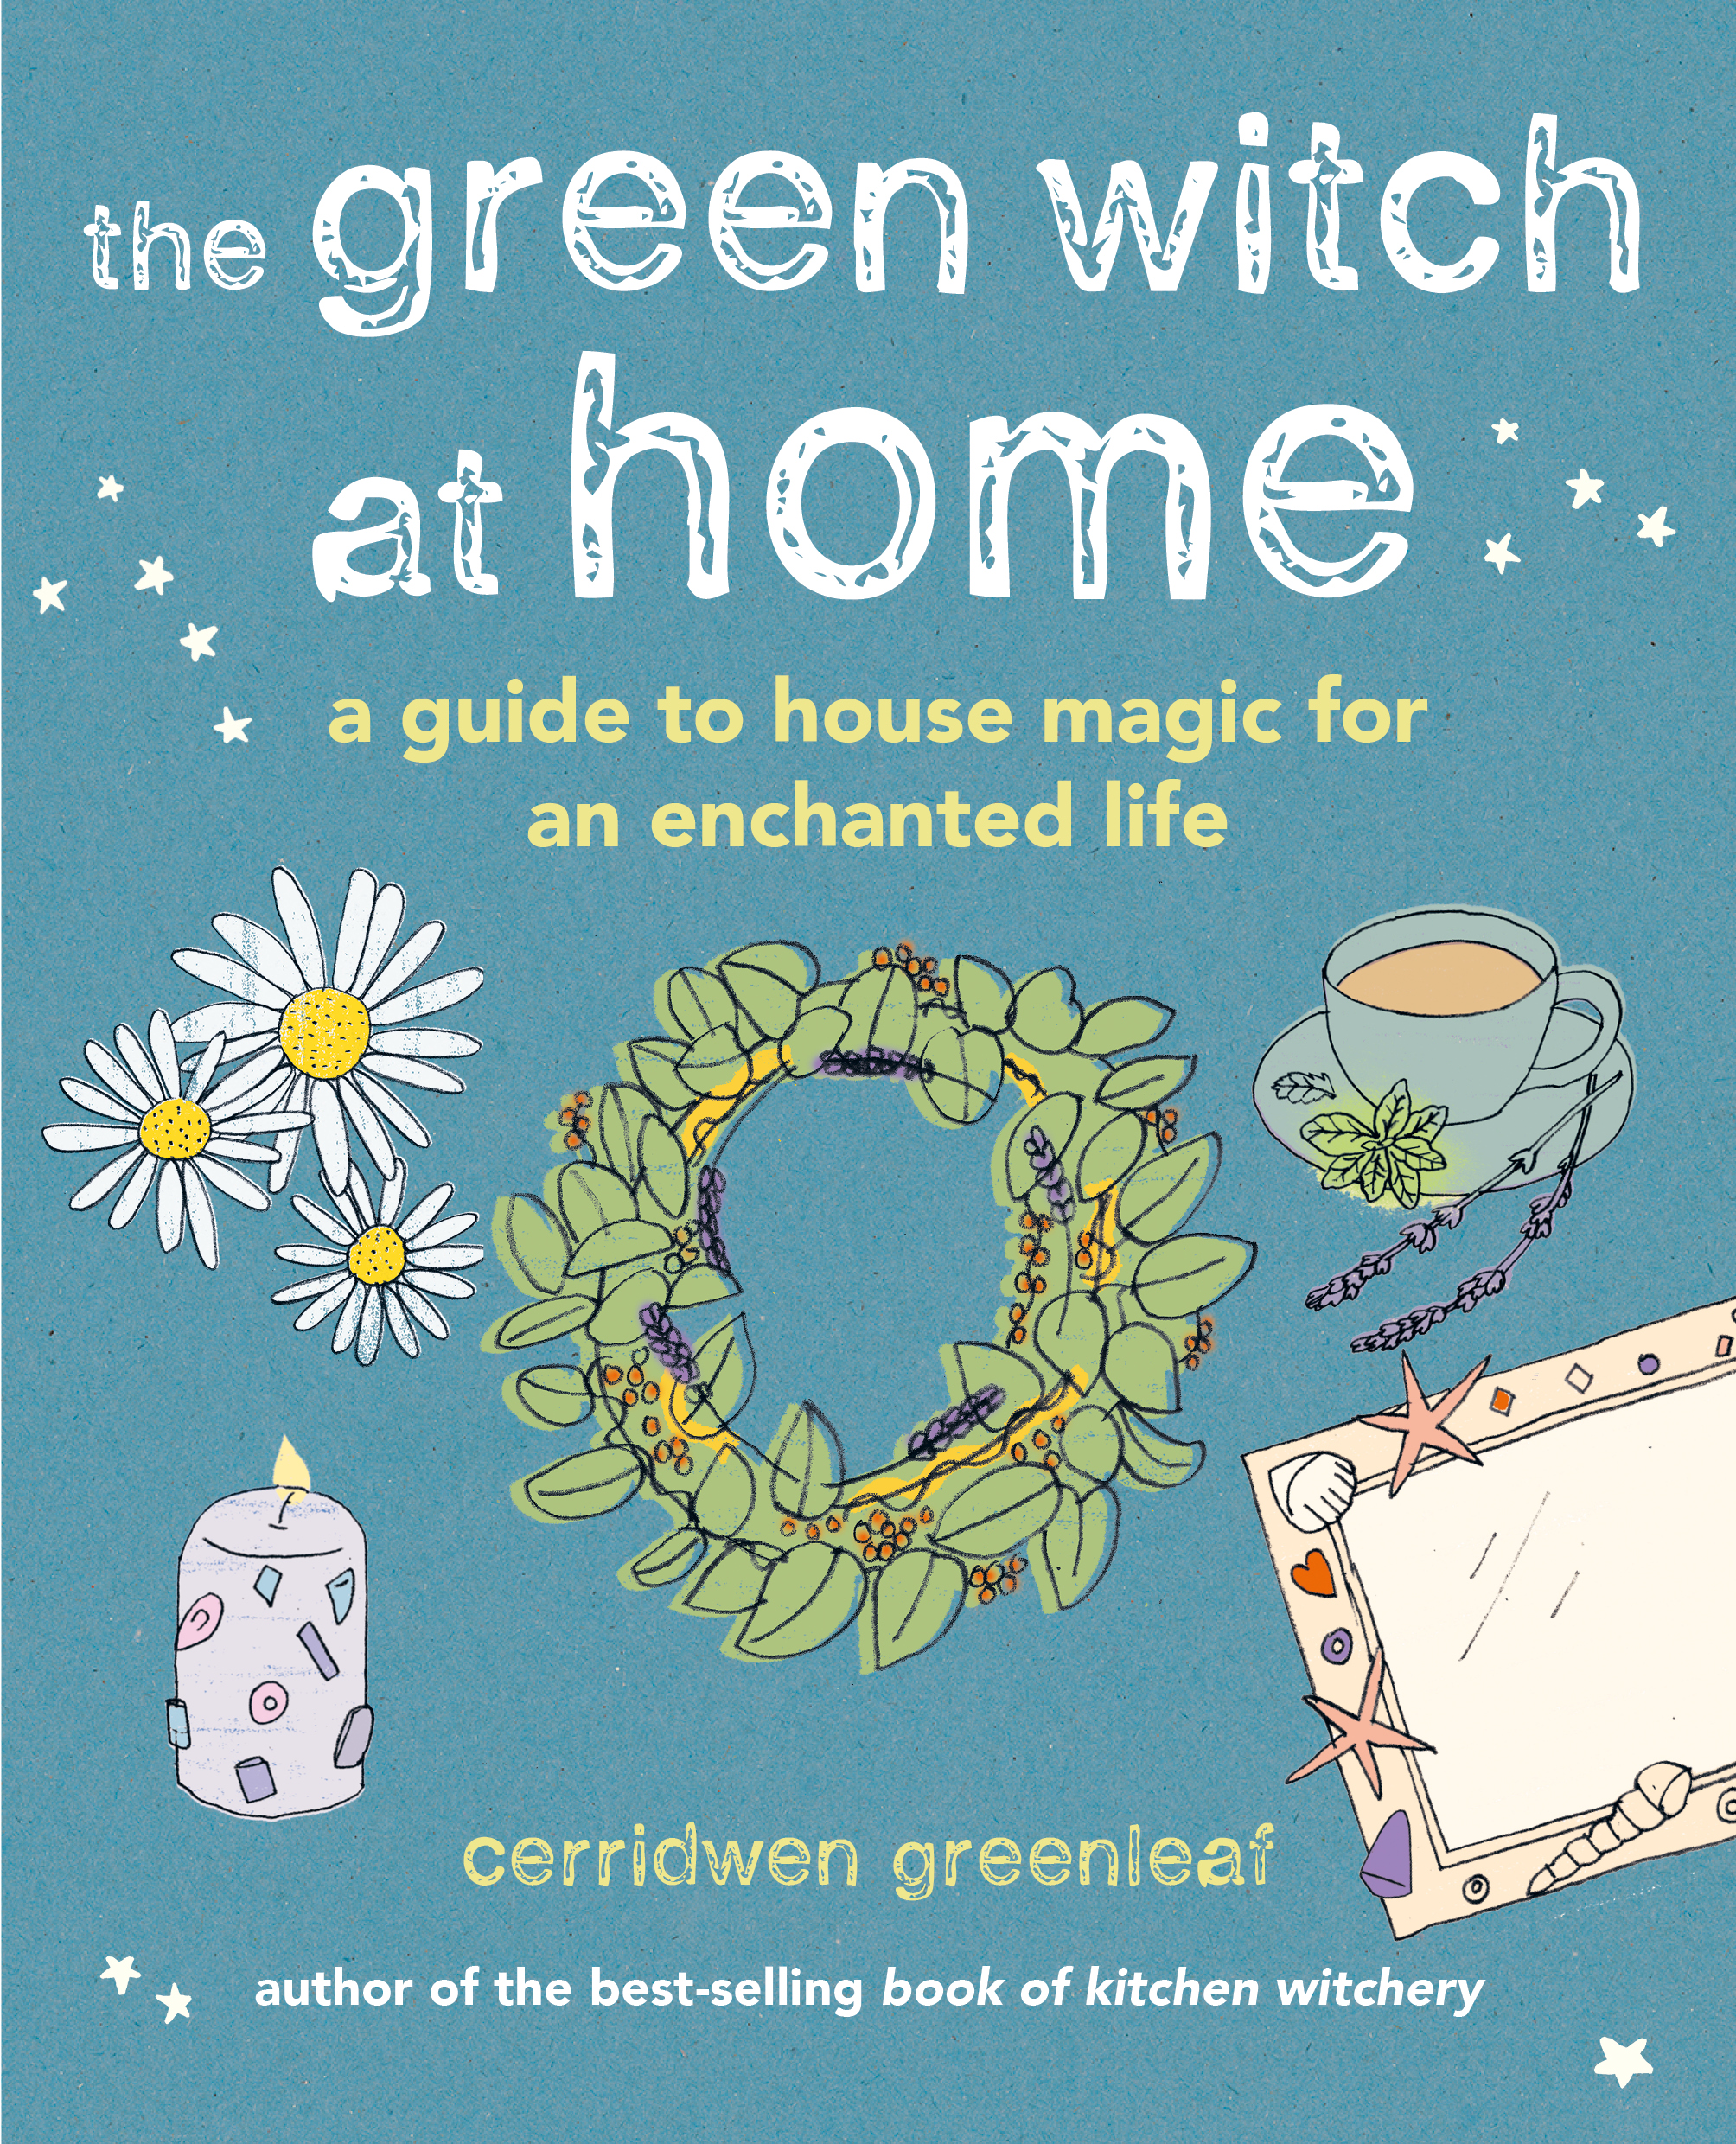 The Green Witch at Home